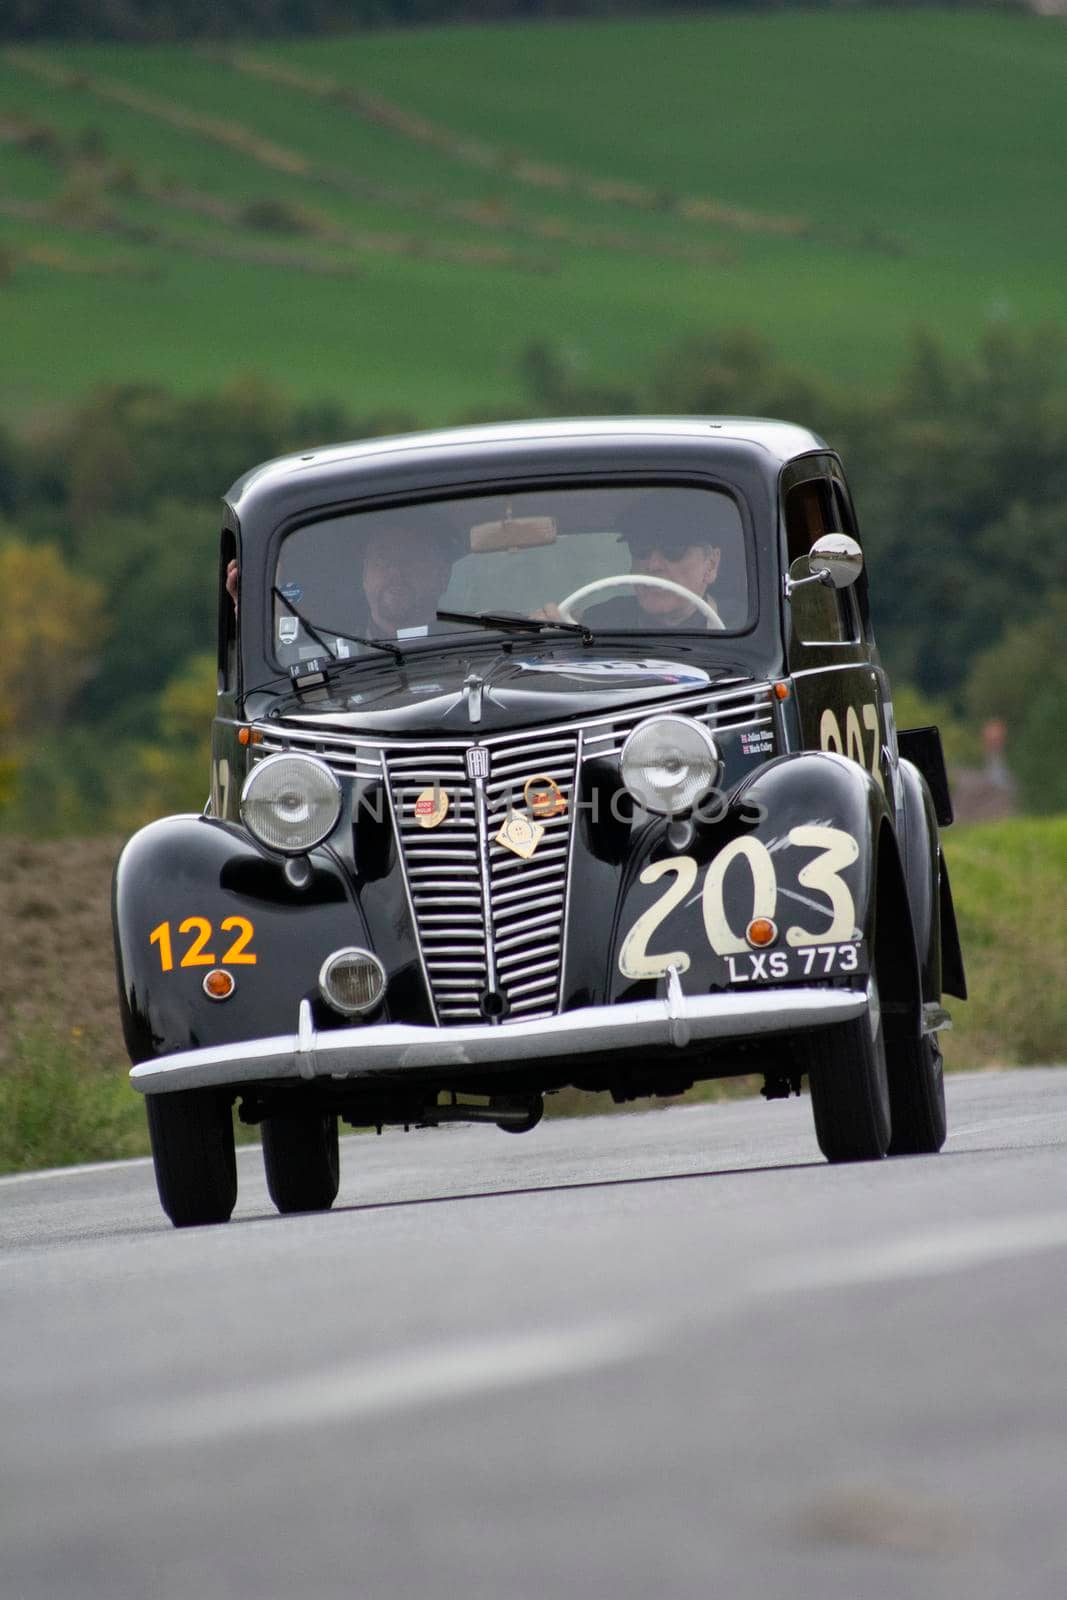 FIAT 1099 MUSONE 1947 on an old racing car in rally Mille Miglia 2020 the famous italian historical race (1927-1957) by massimocampanari